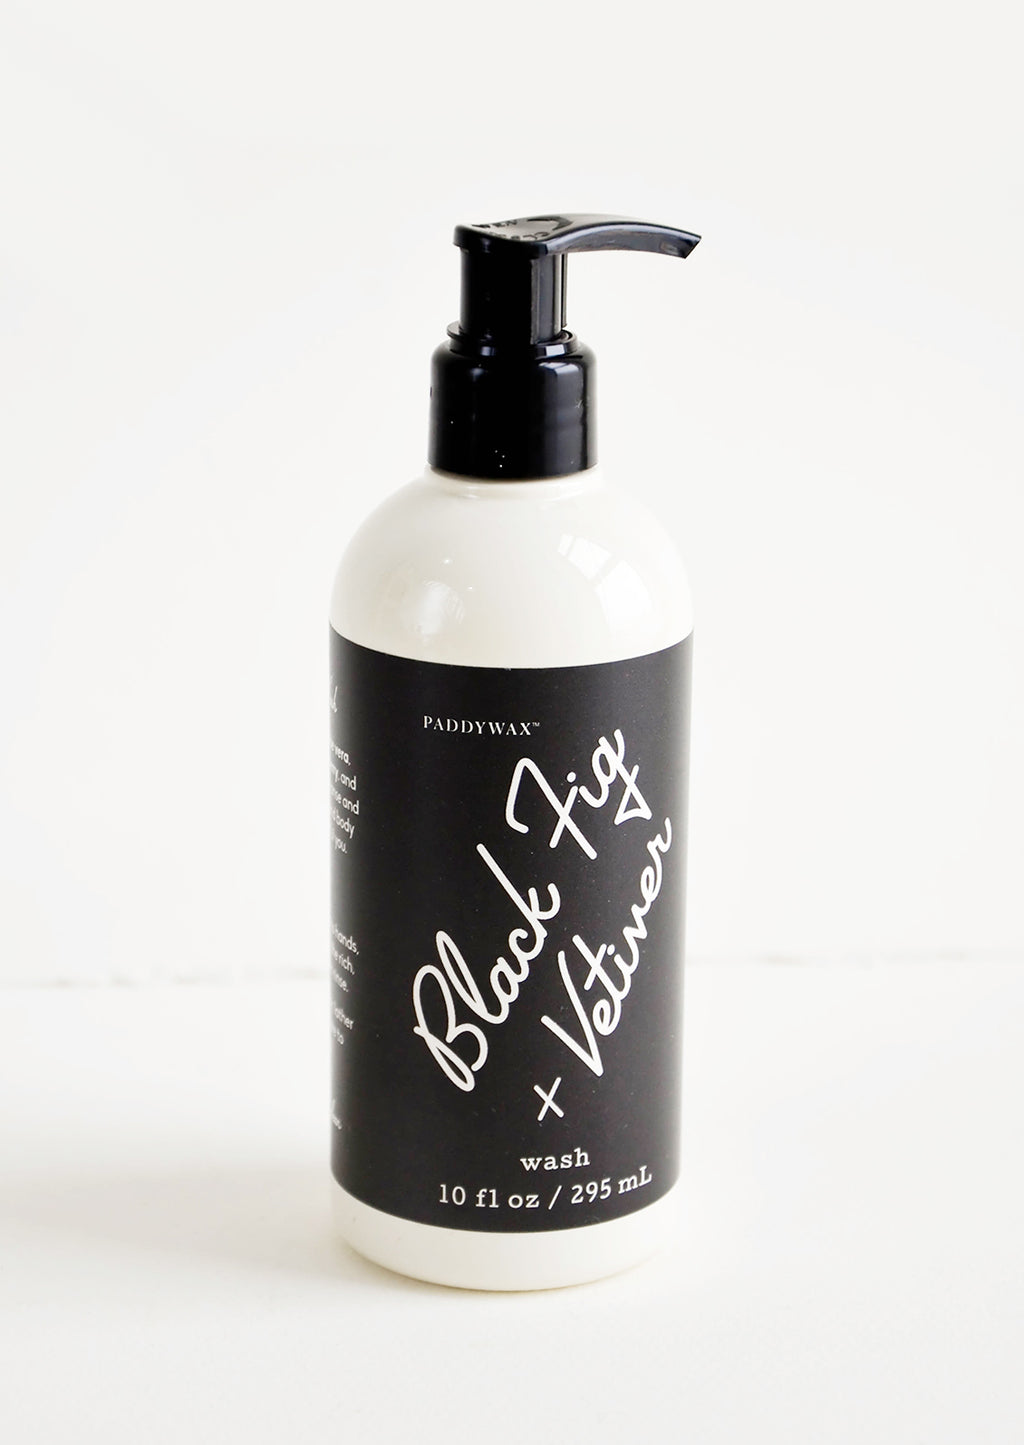 Black Fig & Vetiver: Liquid soap packaged in ivory and black pump bottles with black and white label